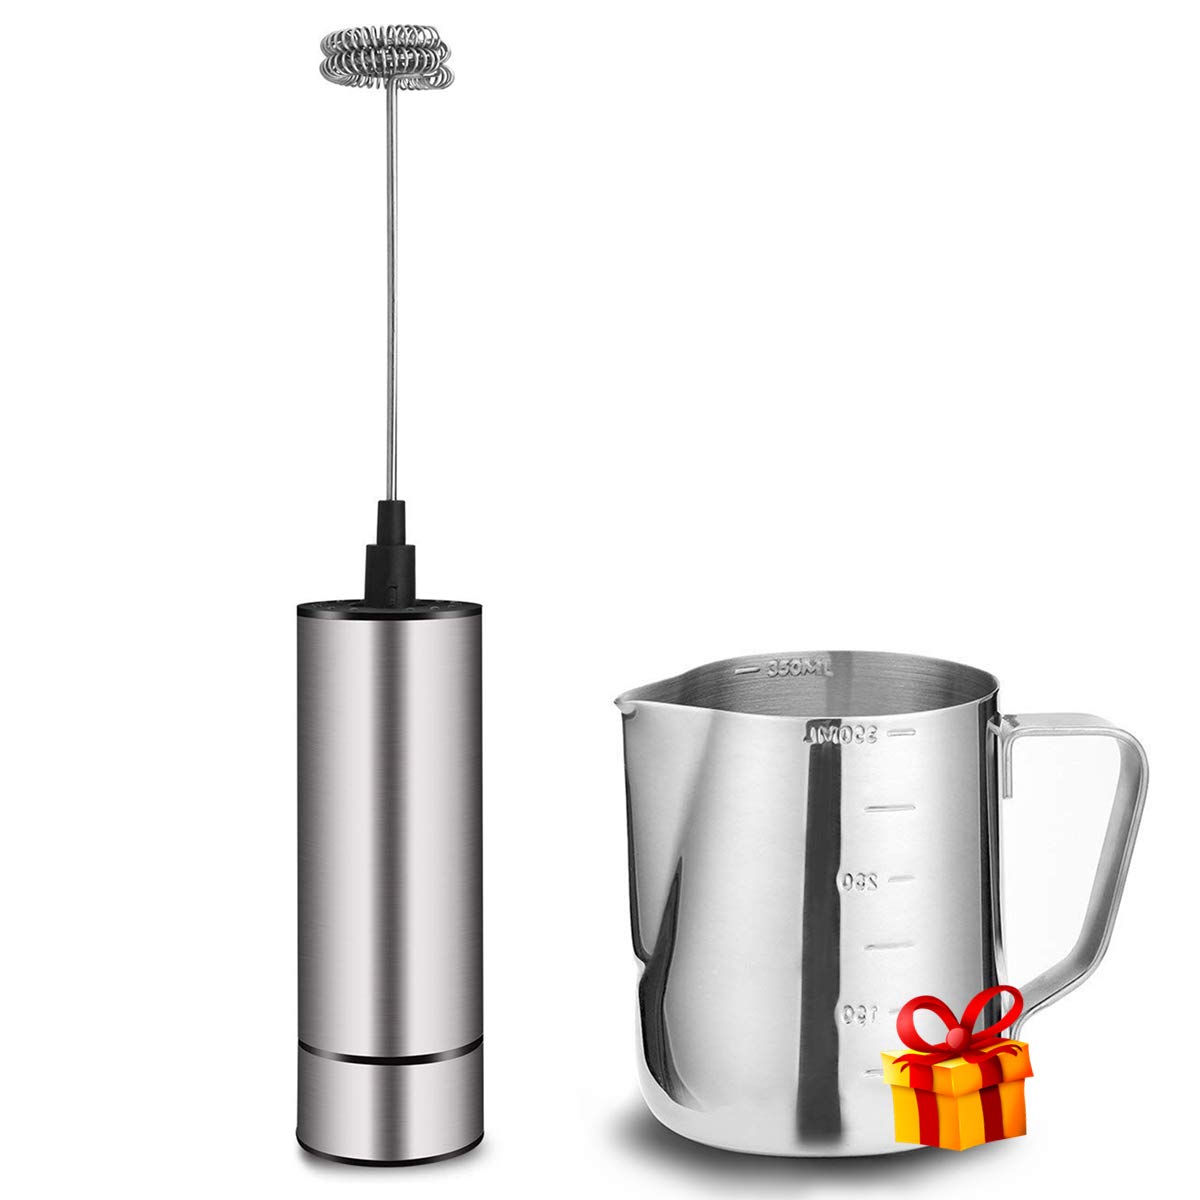  Electric Milk Frother, FENNICA 4-in-1 Stainless Steel